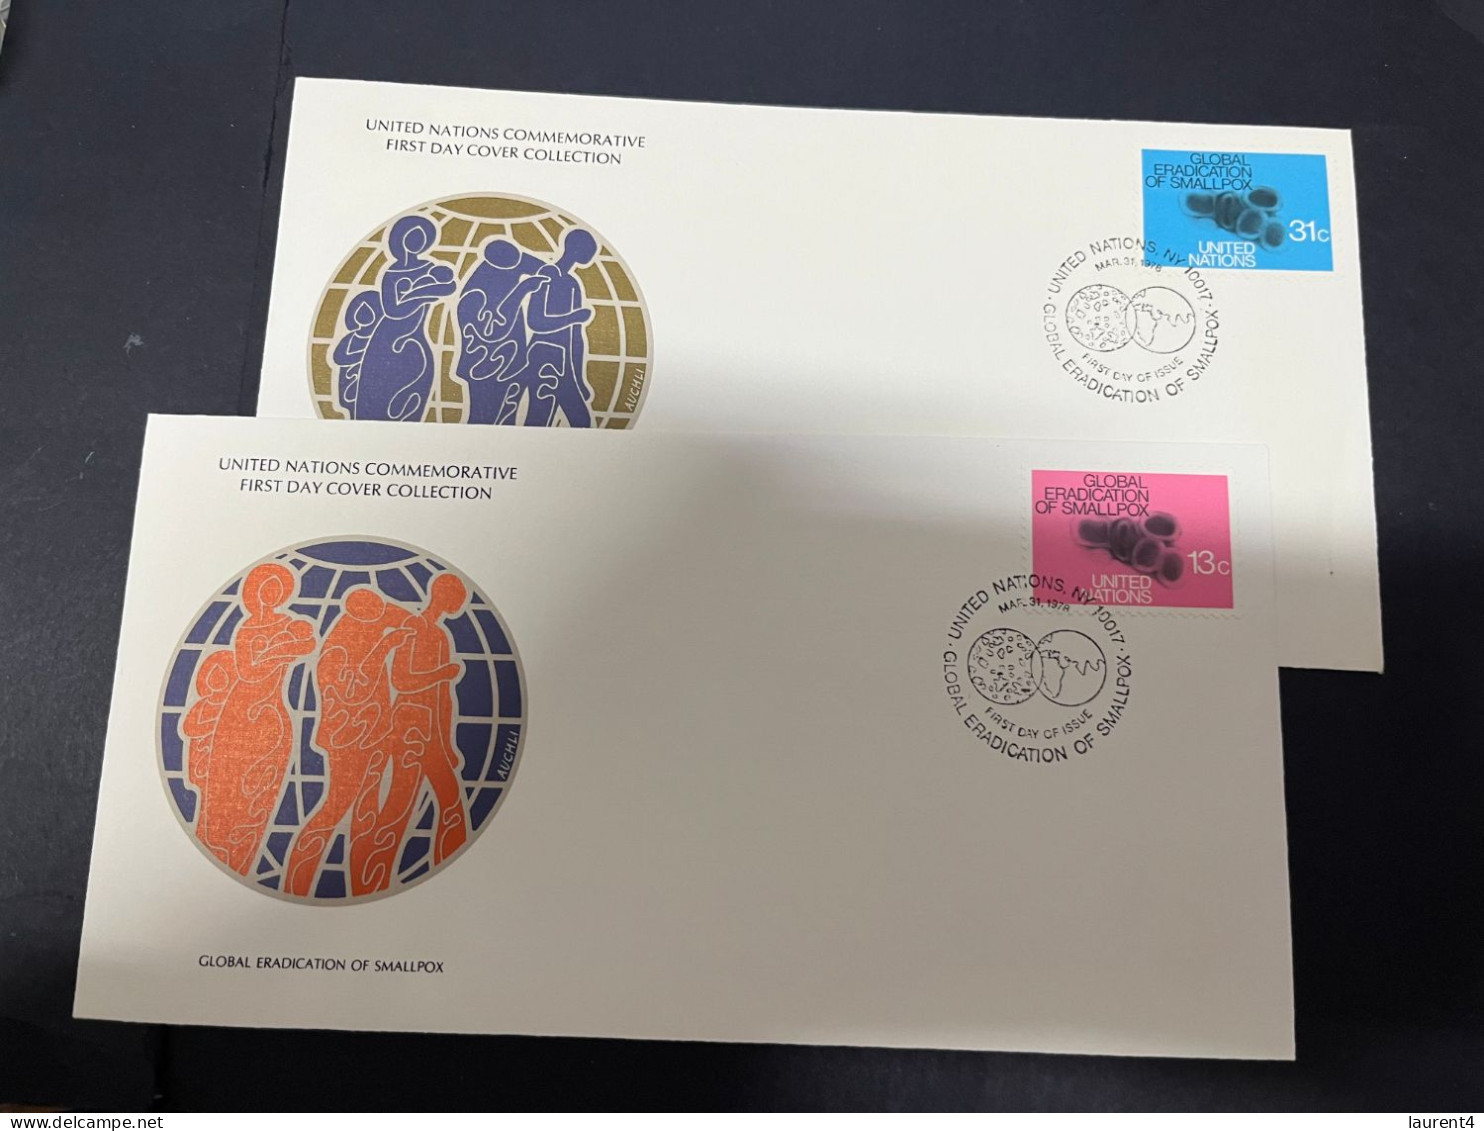 19-4-2024 (2 Z 29) United Nations (USA Office) X 2 FDC - Eredication Of Smallpox - Ziekte